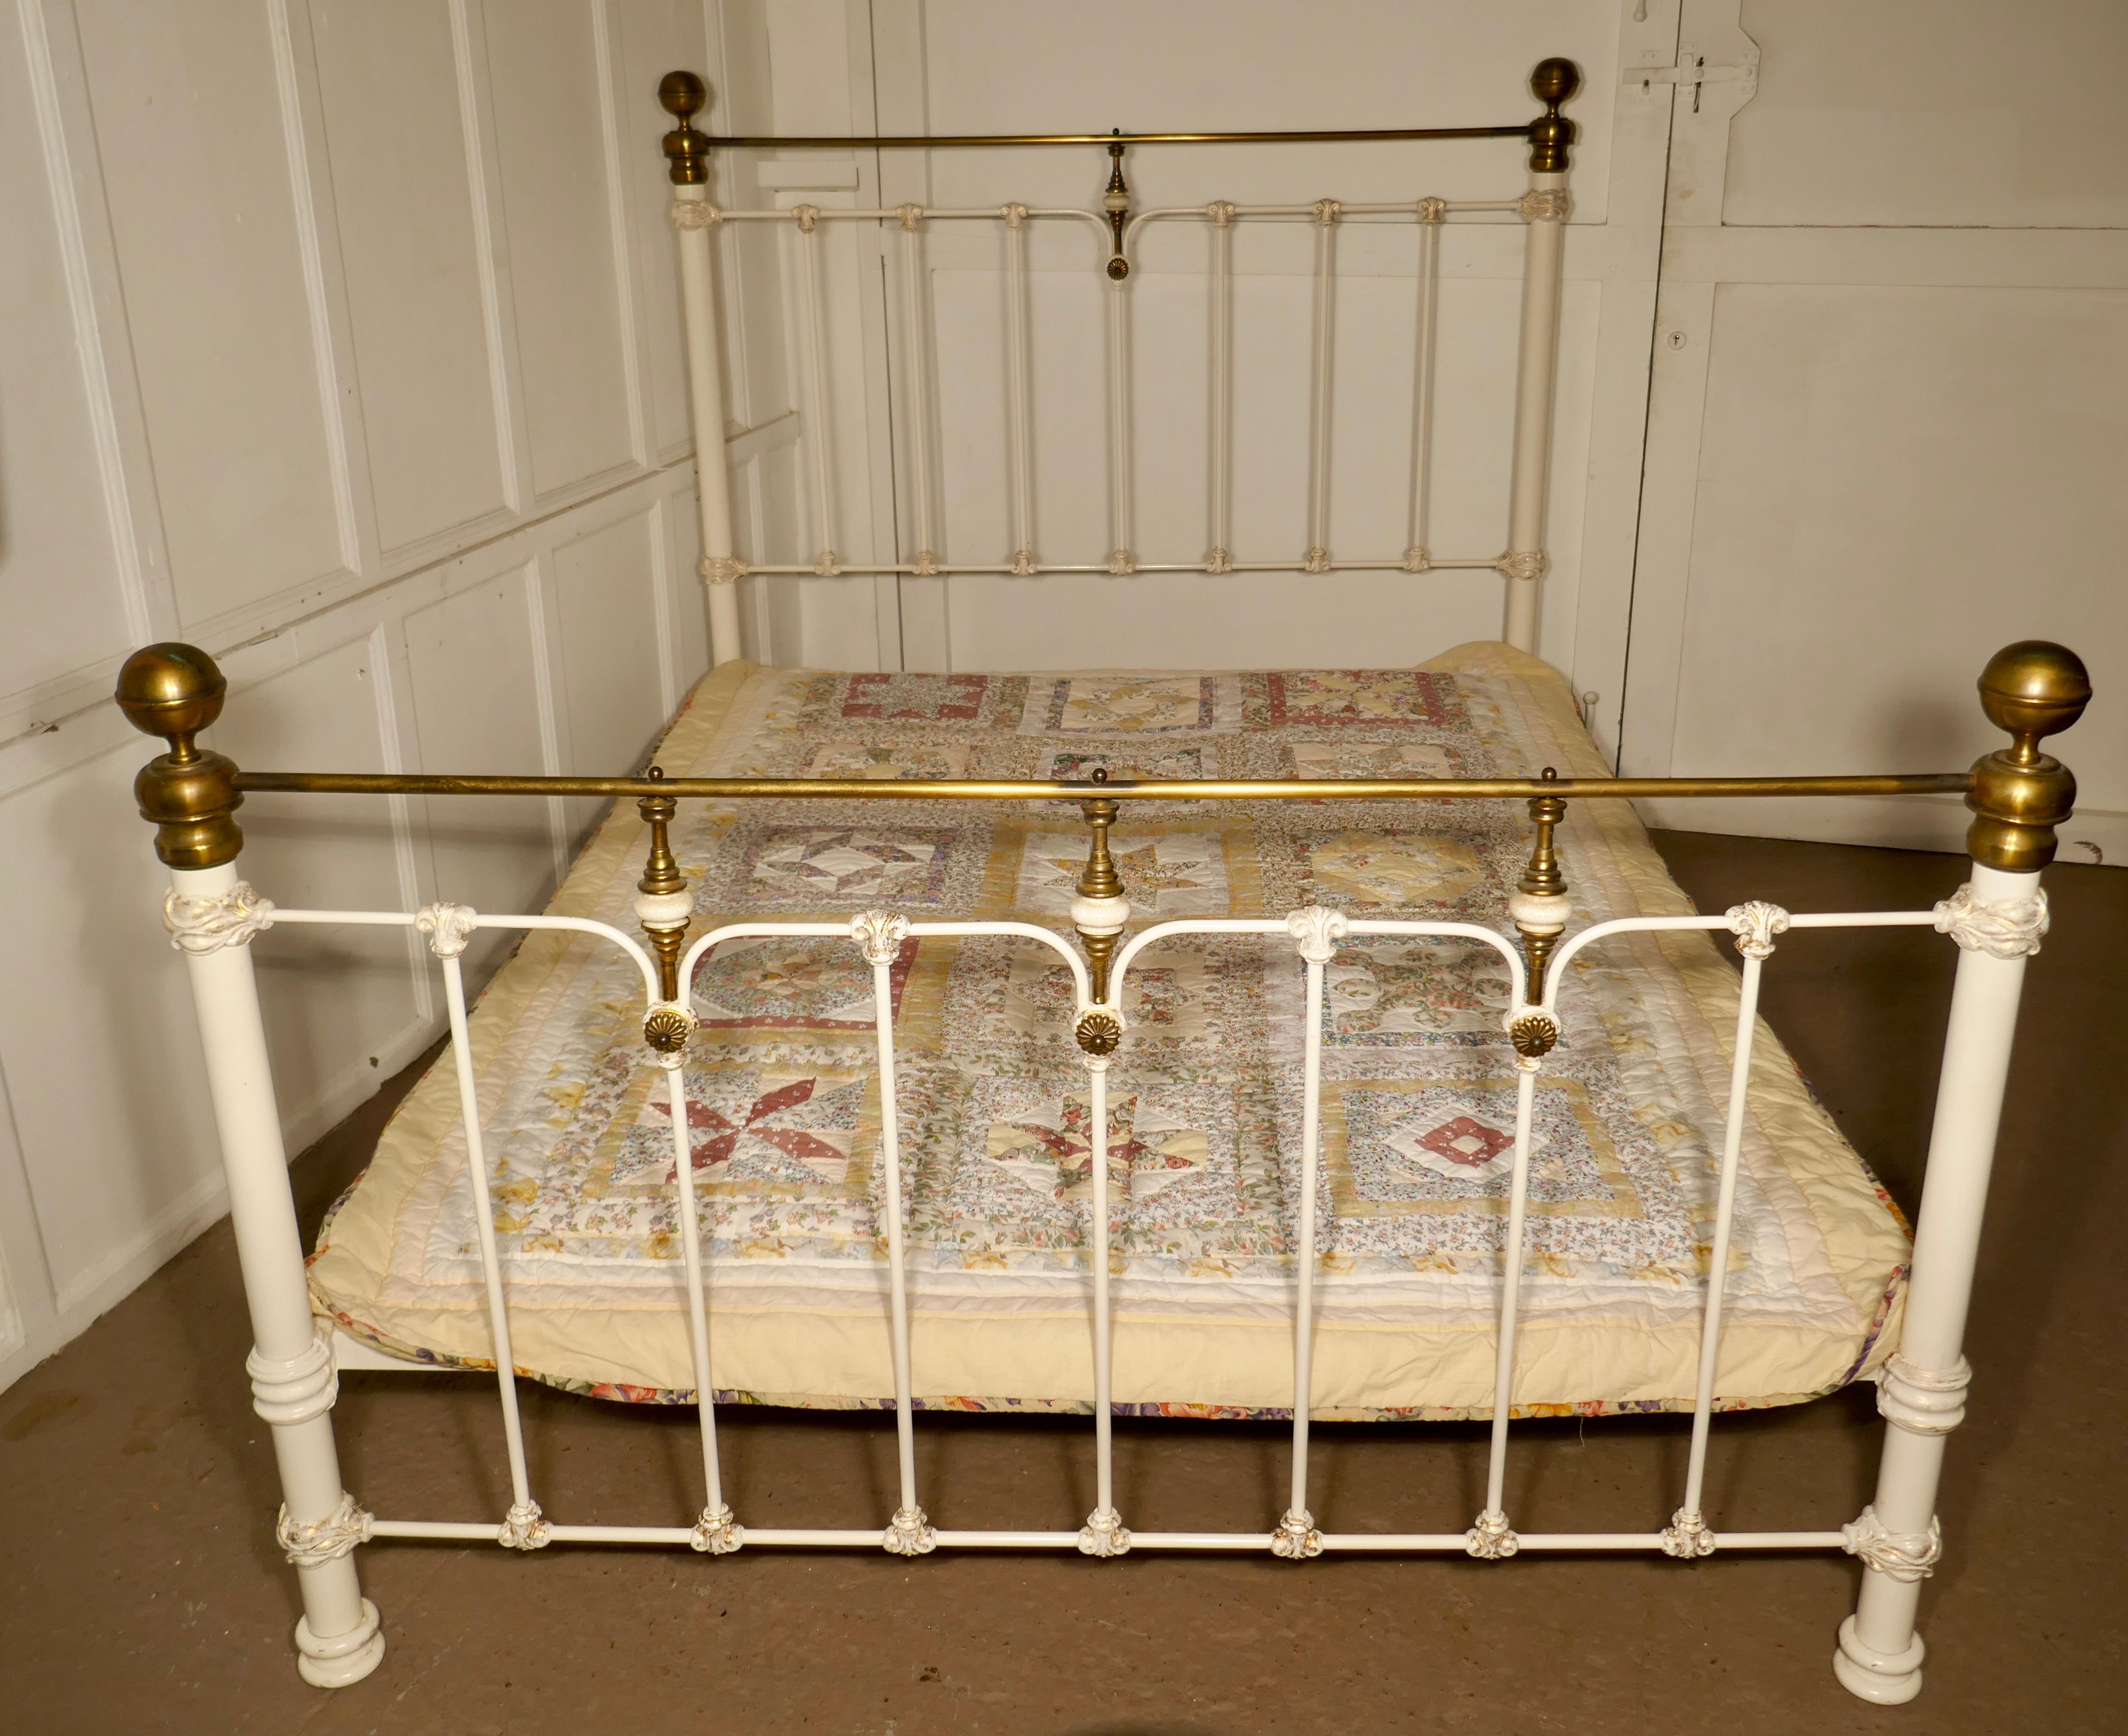 A good quality brass and iron king size 5ft wide bed

This is a mid-20th century brass and iron king size bed, it is in original white paint, somewhat darkened with age, with pretty gold detail
All in all a very attractive bed timeless in design